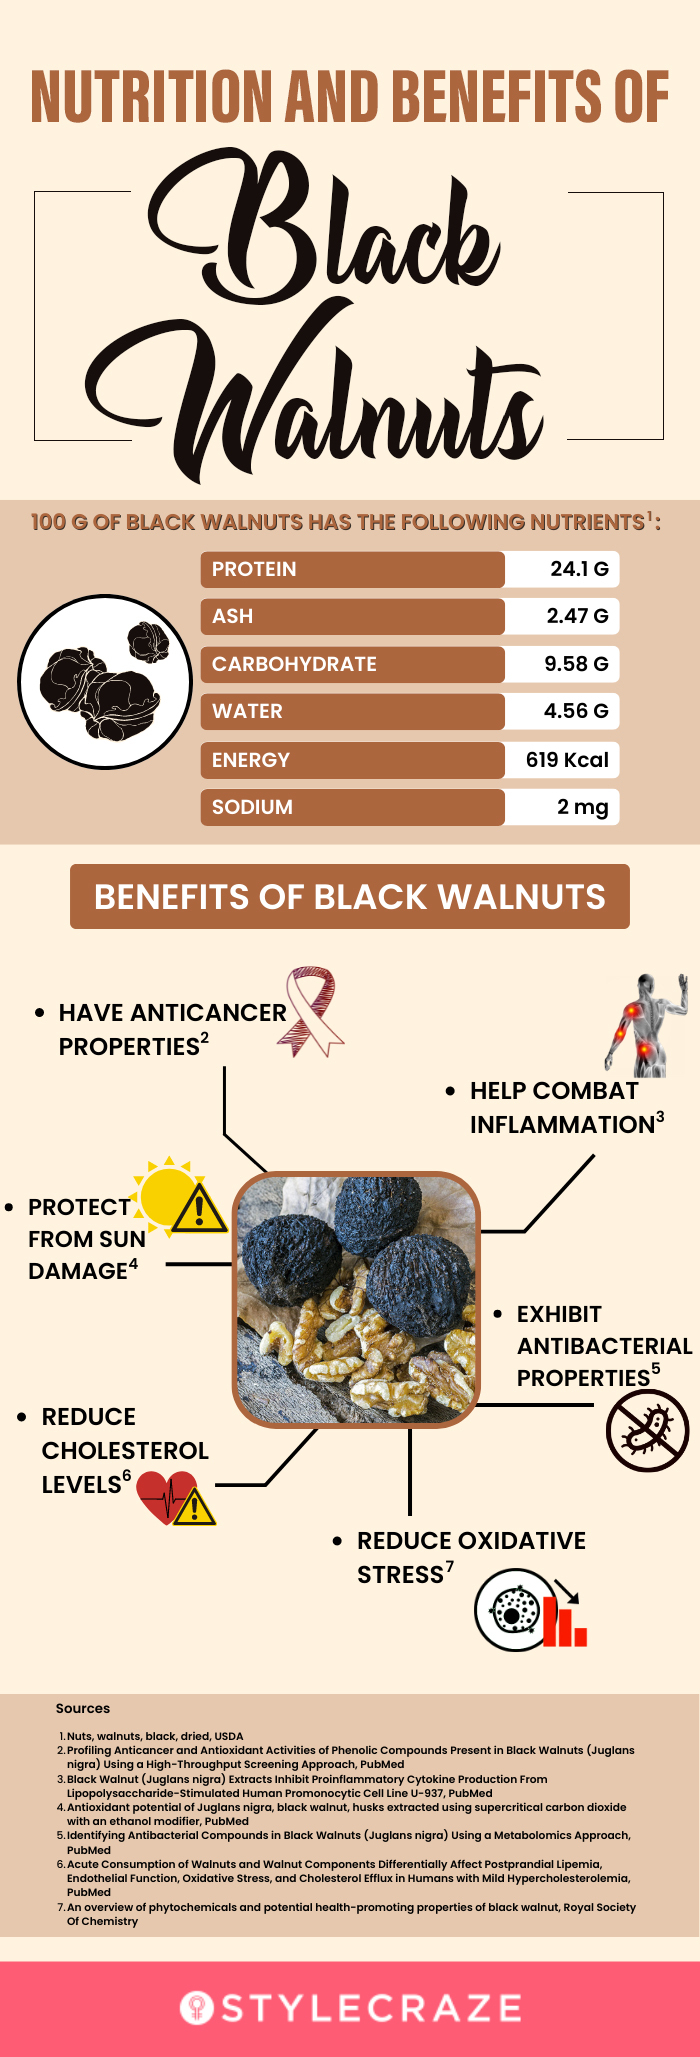 nutrition and benefits of black walnuts(infographic)